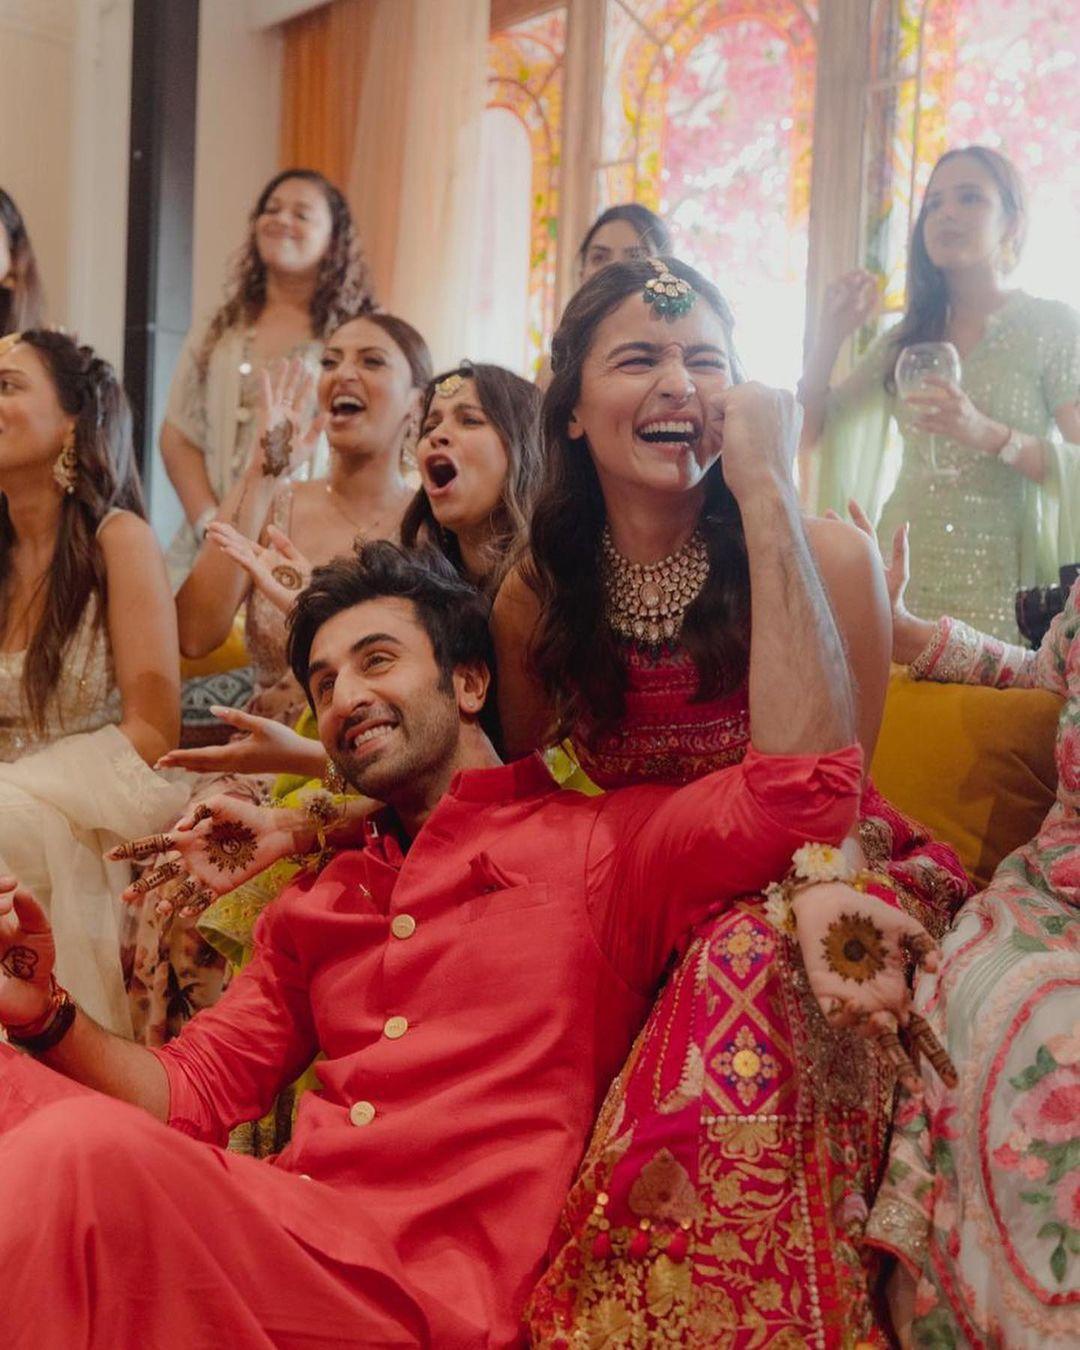 Alia Bhatt and Ranbir Kapoor had a minimalistic wedding at their bungalow. For their Mehendi function, Alia wore an orange lehenga set, while Ranbir complemented her in a matching sherwani. The actress left her hair open while she wore contrasting jewellery with it